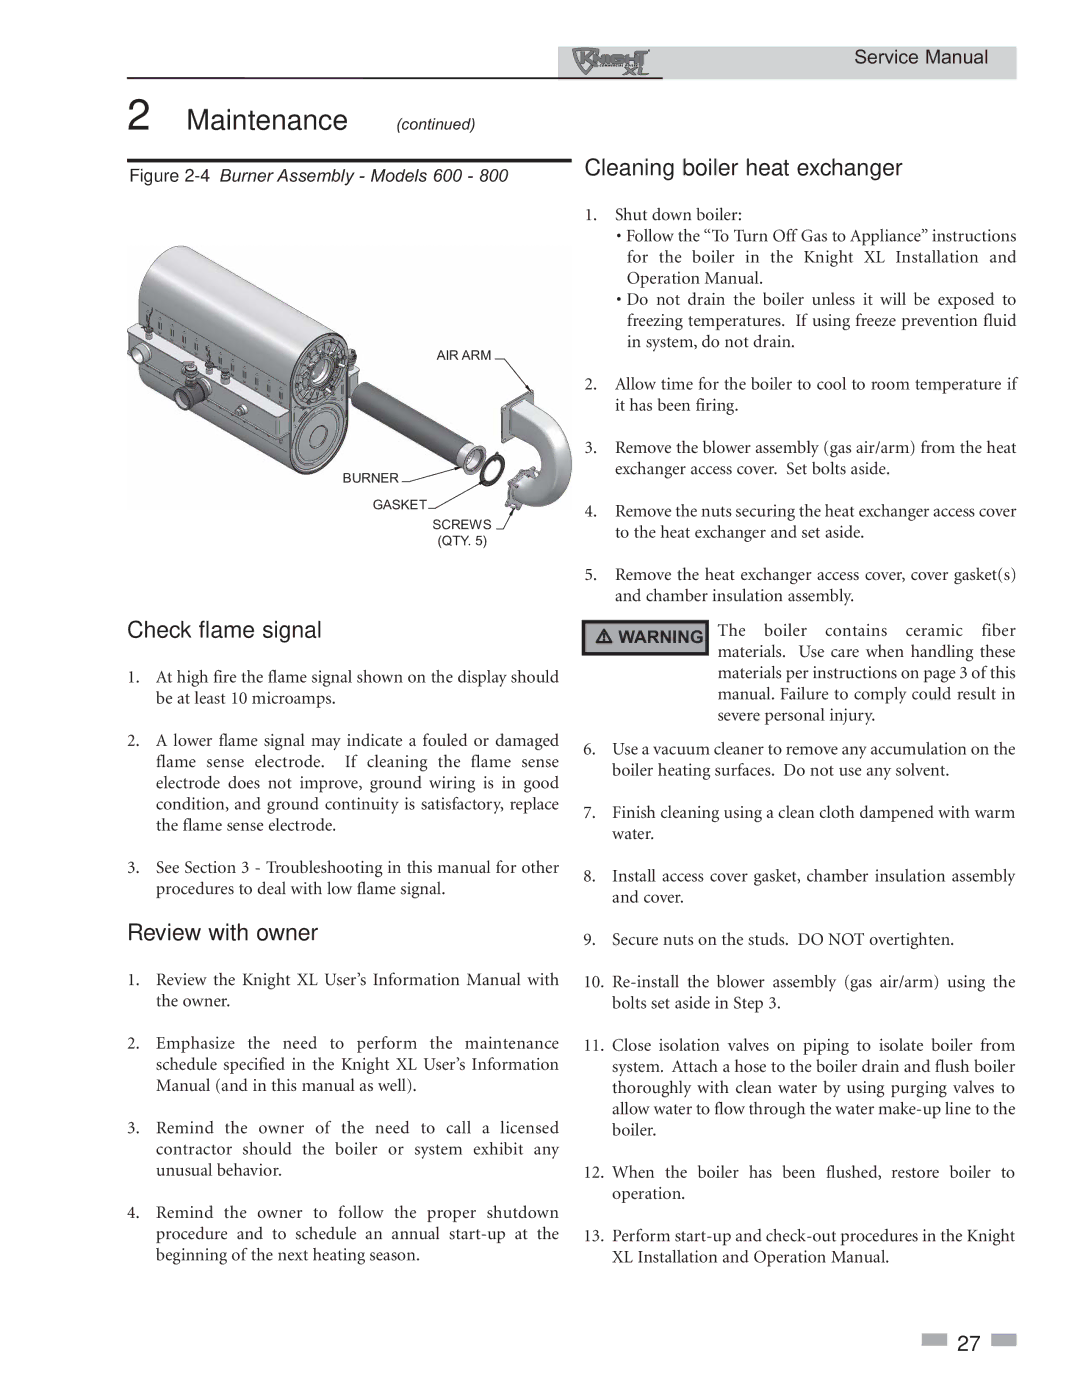 Lochinvar 399 - 800 service manual Check flame signal, Review with owner, Cleaning boiler heat exchanger 